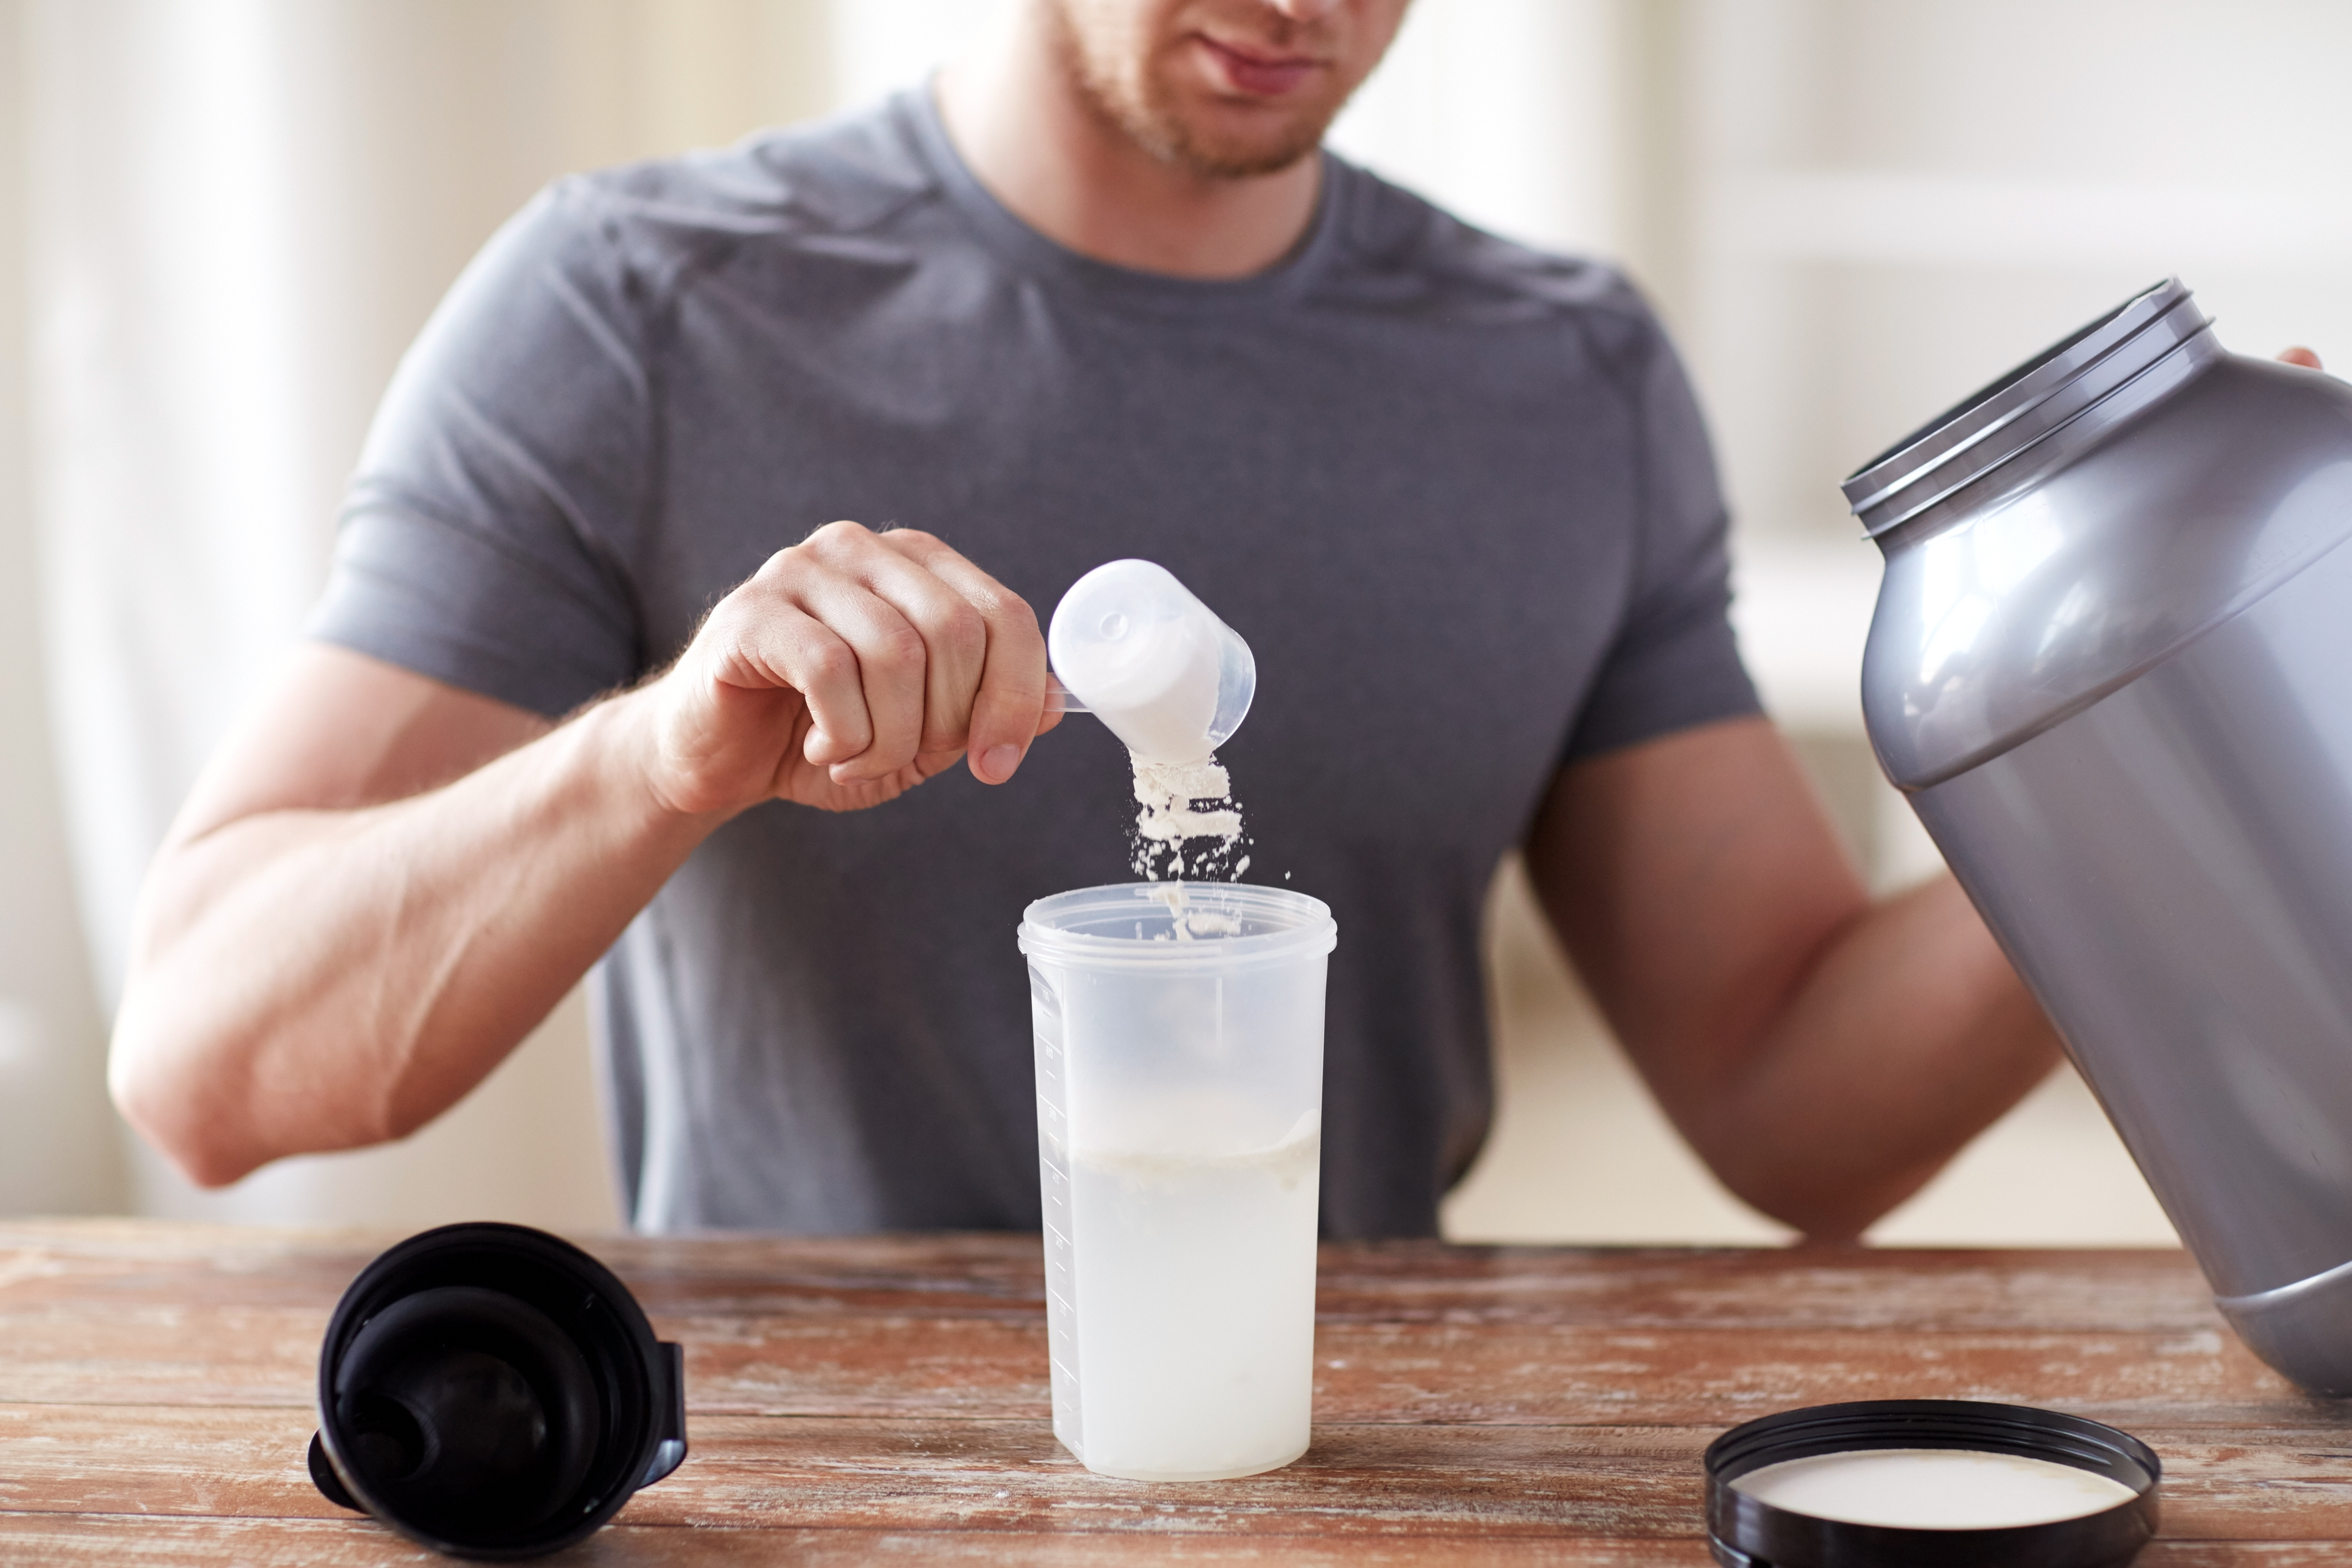 7 Potential Side Effects of Stopping Creatine Intake